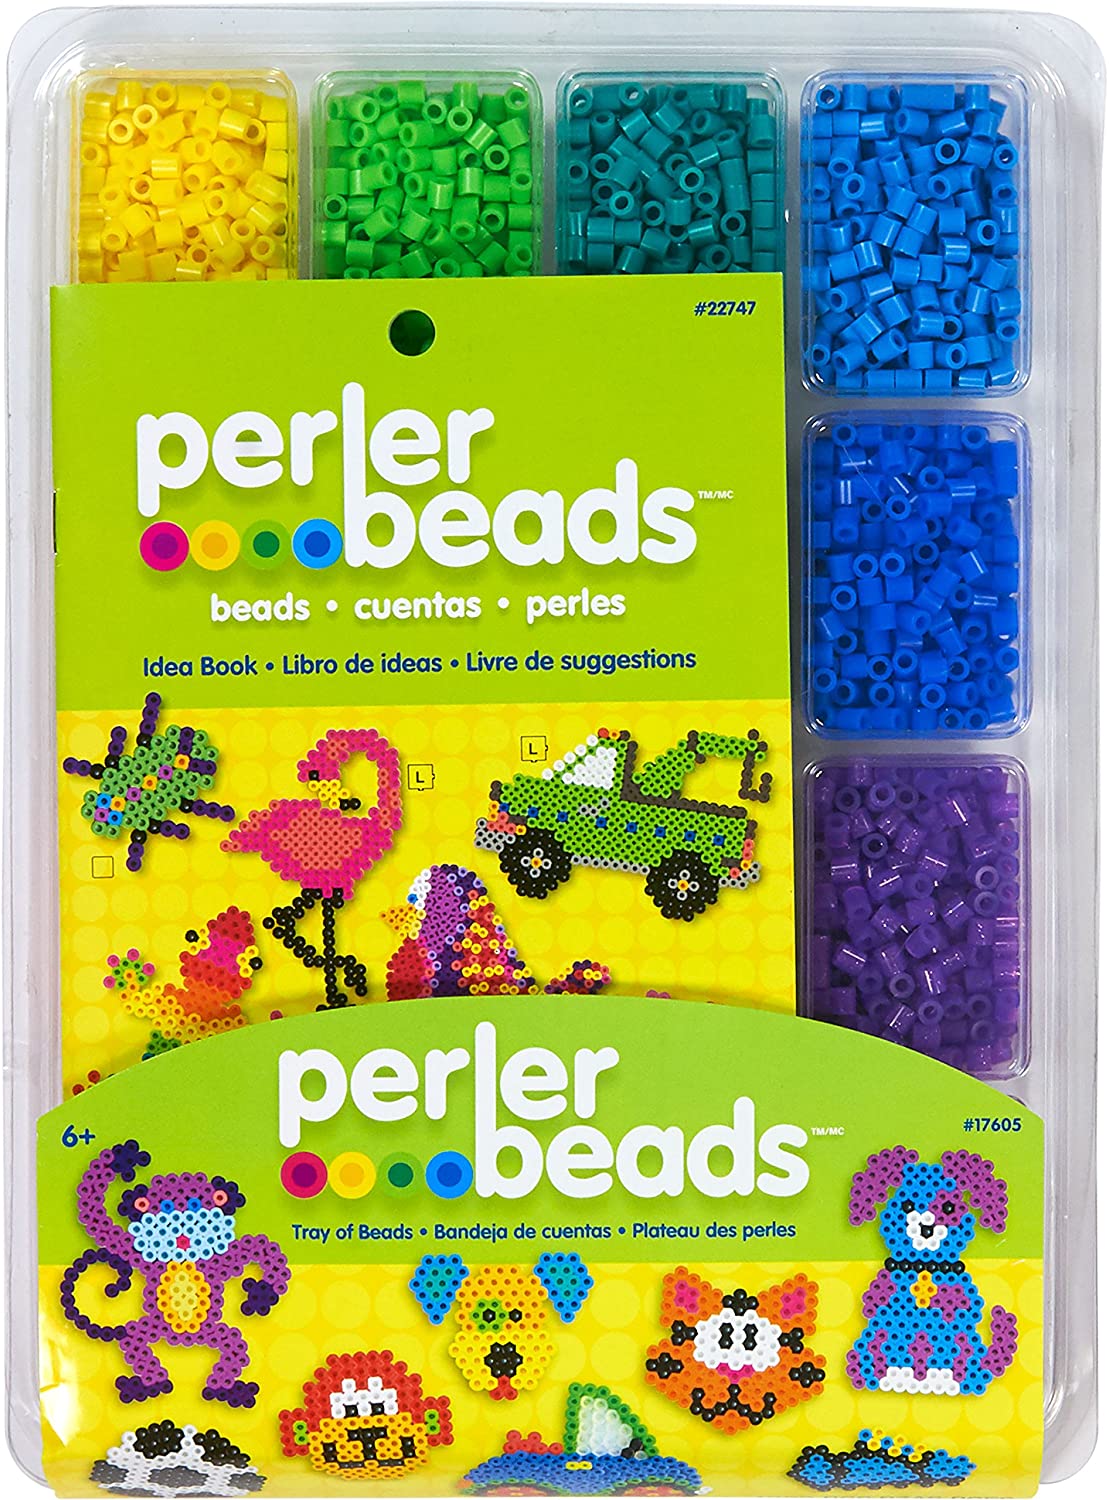 4001 pcs ..Multicolor New Beads Assorted Fuse Beads Tray for Kids Crafts with Bead Pattern Book 